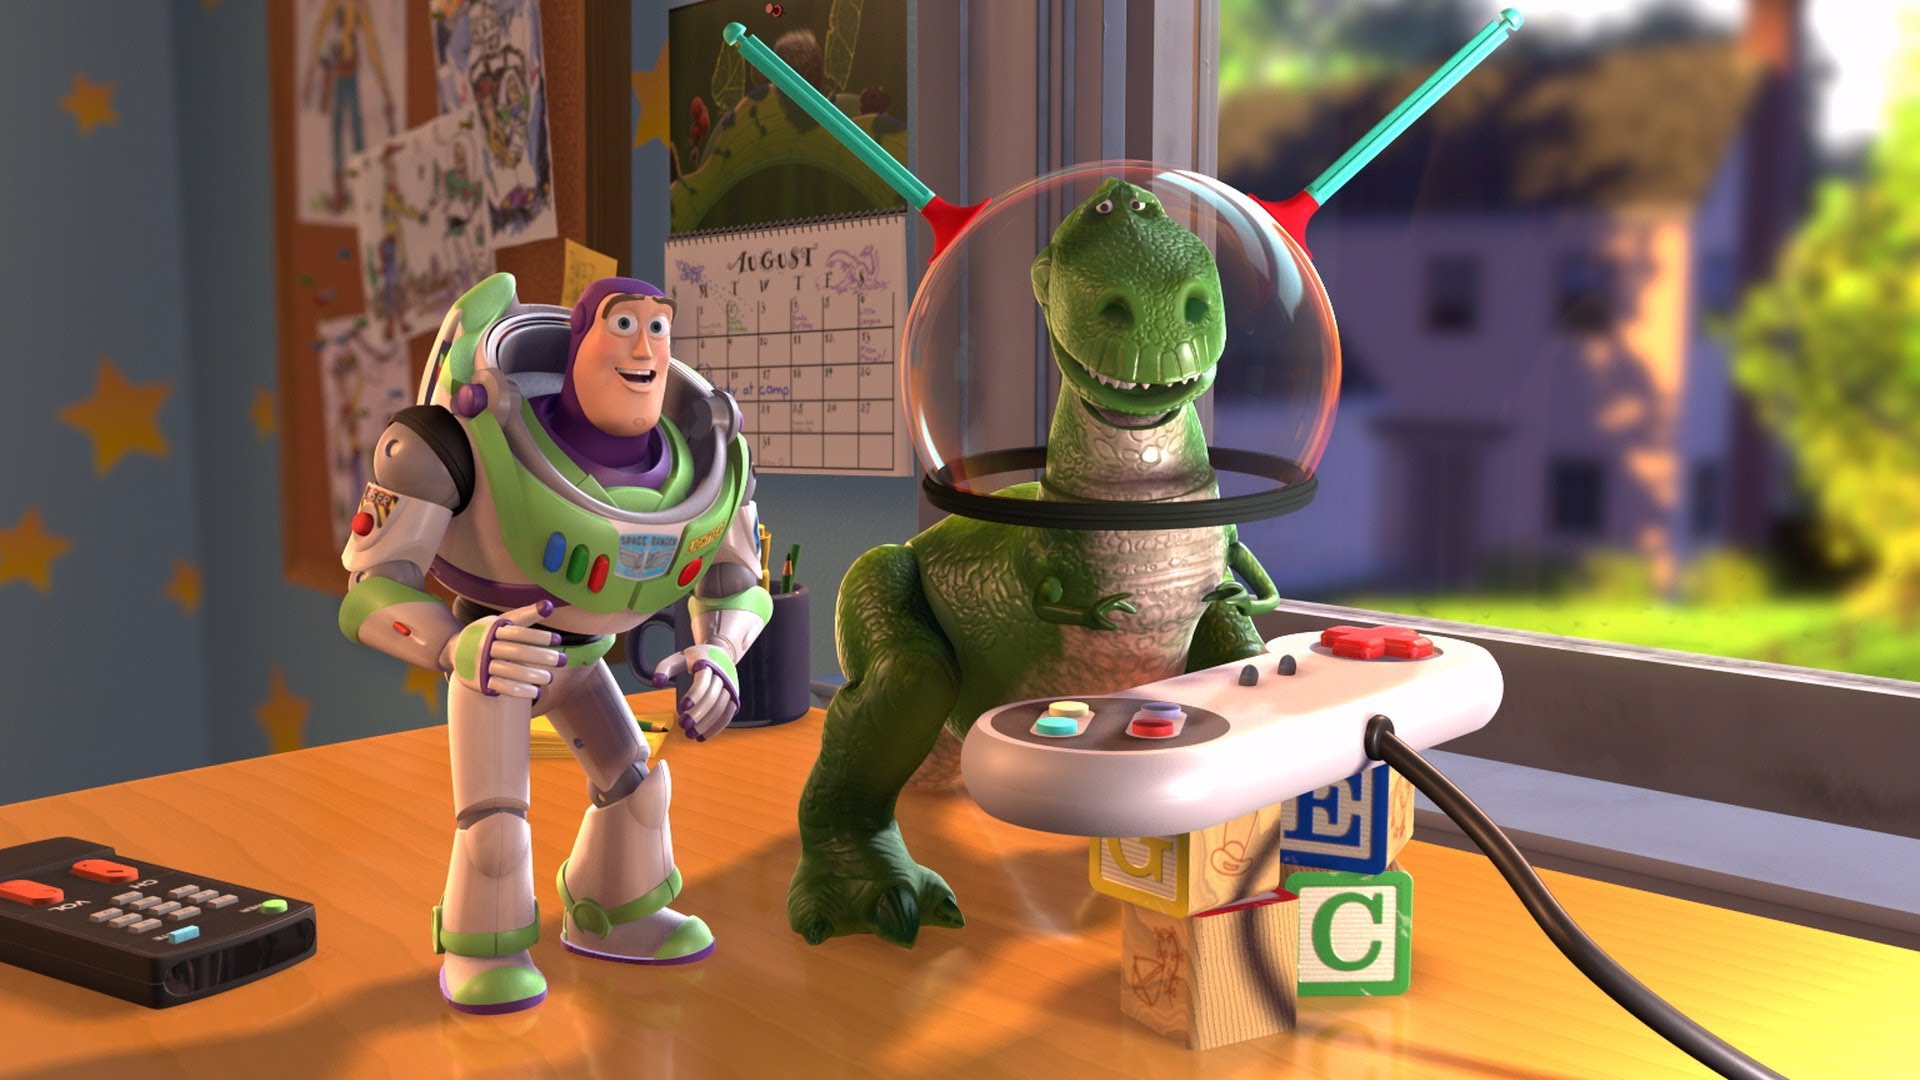 Toy Story 2 Backgrounds, Compatible - PC, Mobile, Gadgets| 1920x1080 px